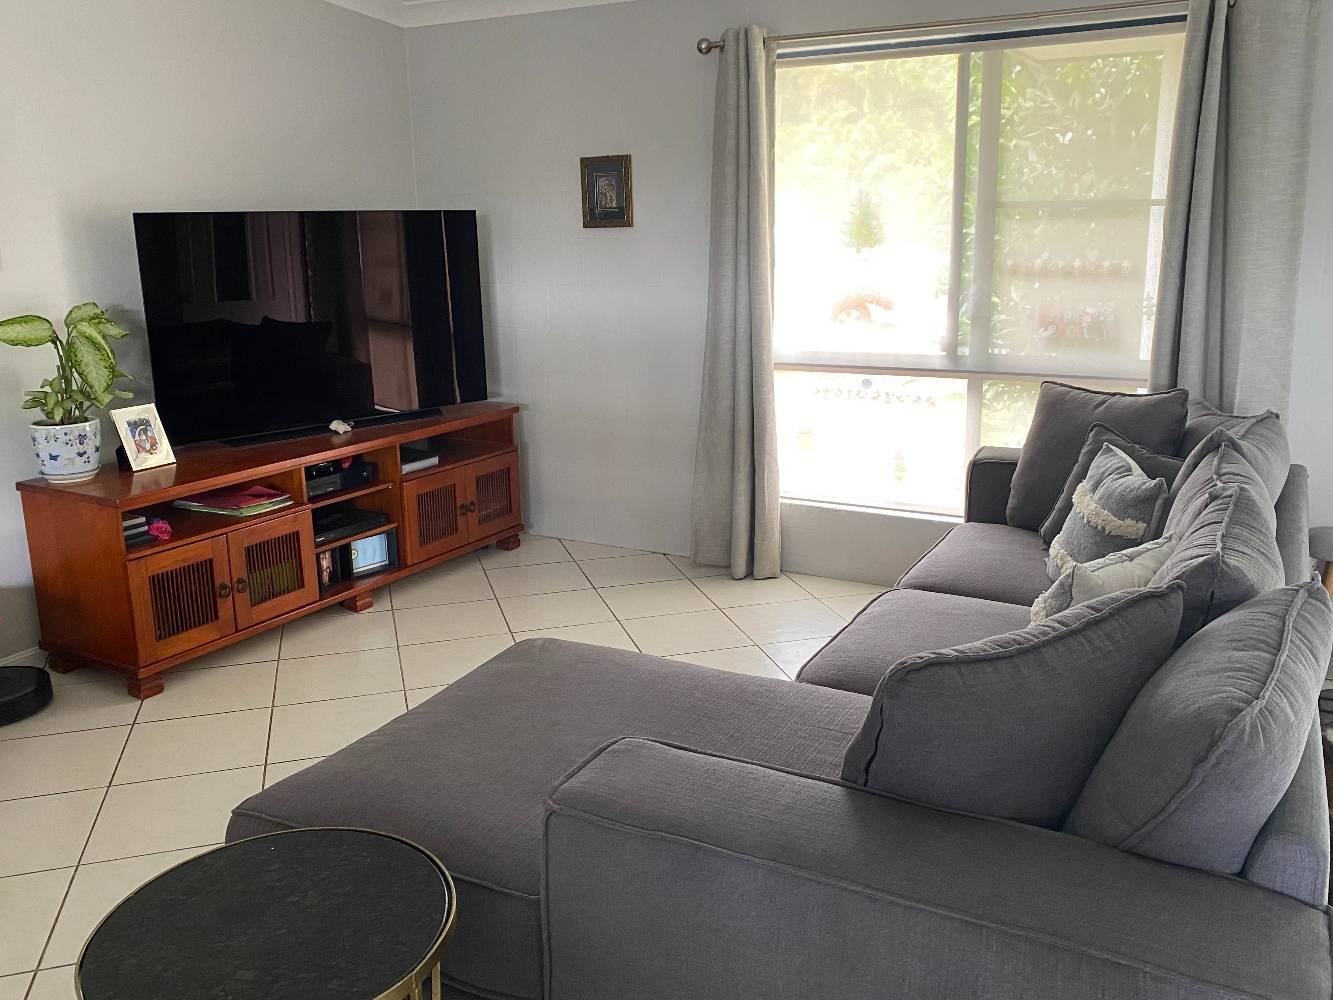 Lounge room with large flat screen smart tv, new comfy couch, aircon and fan.